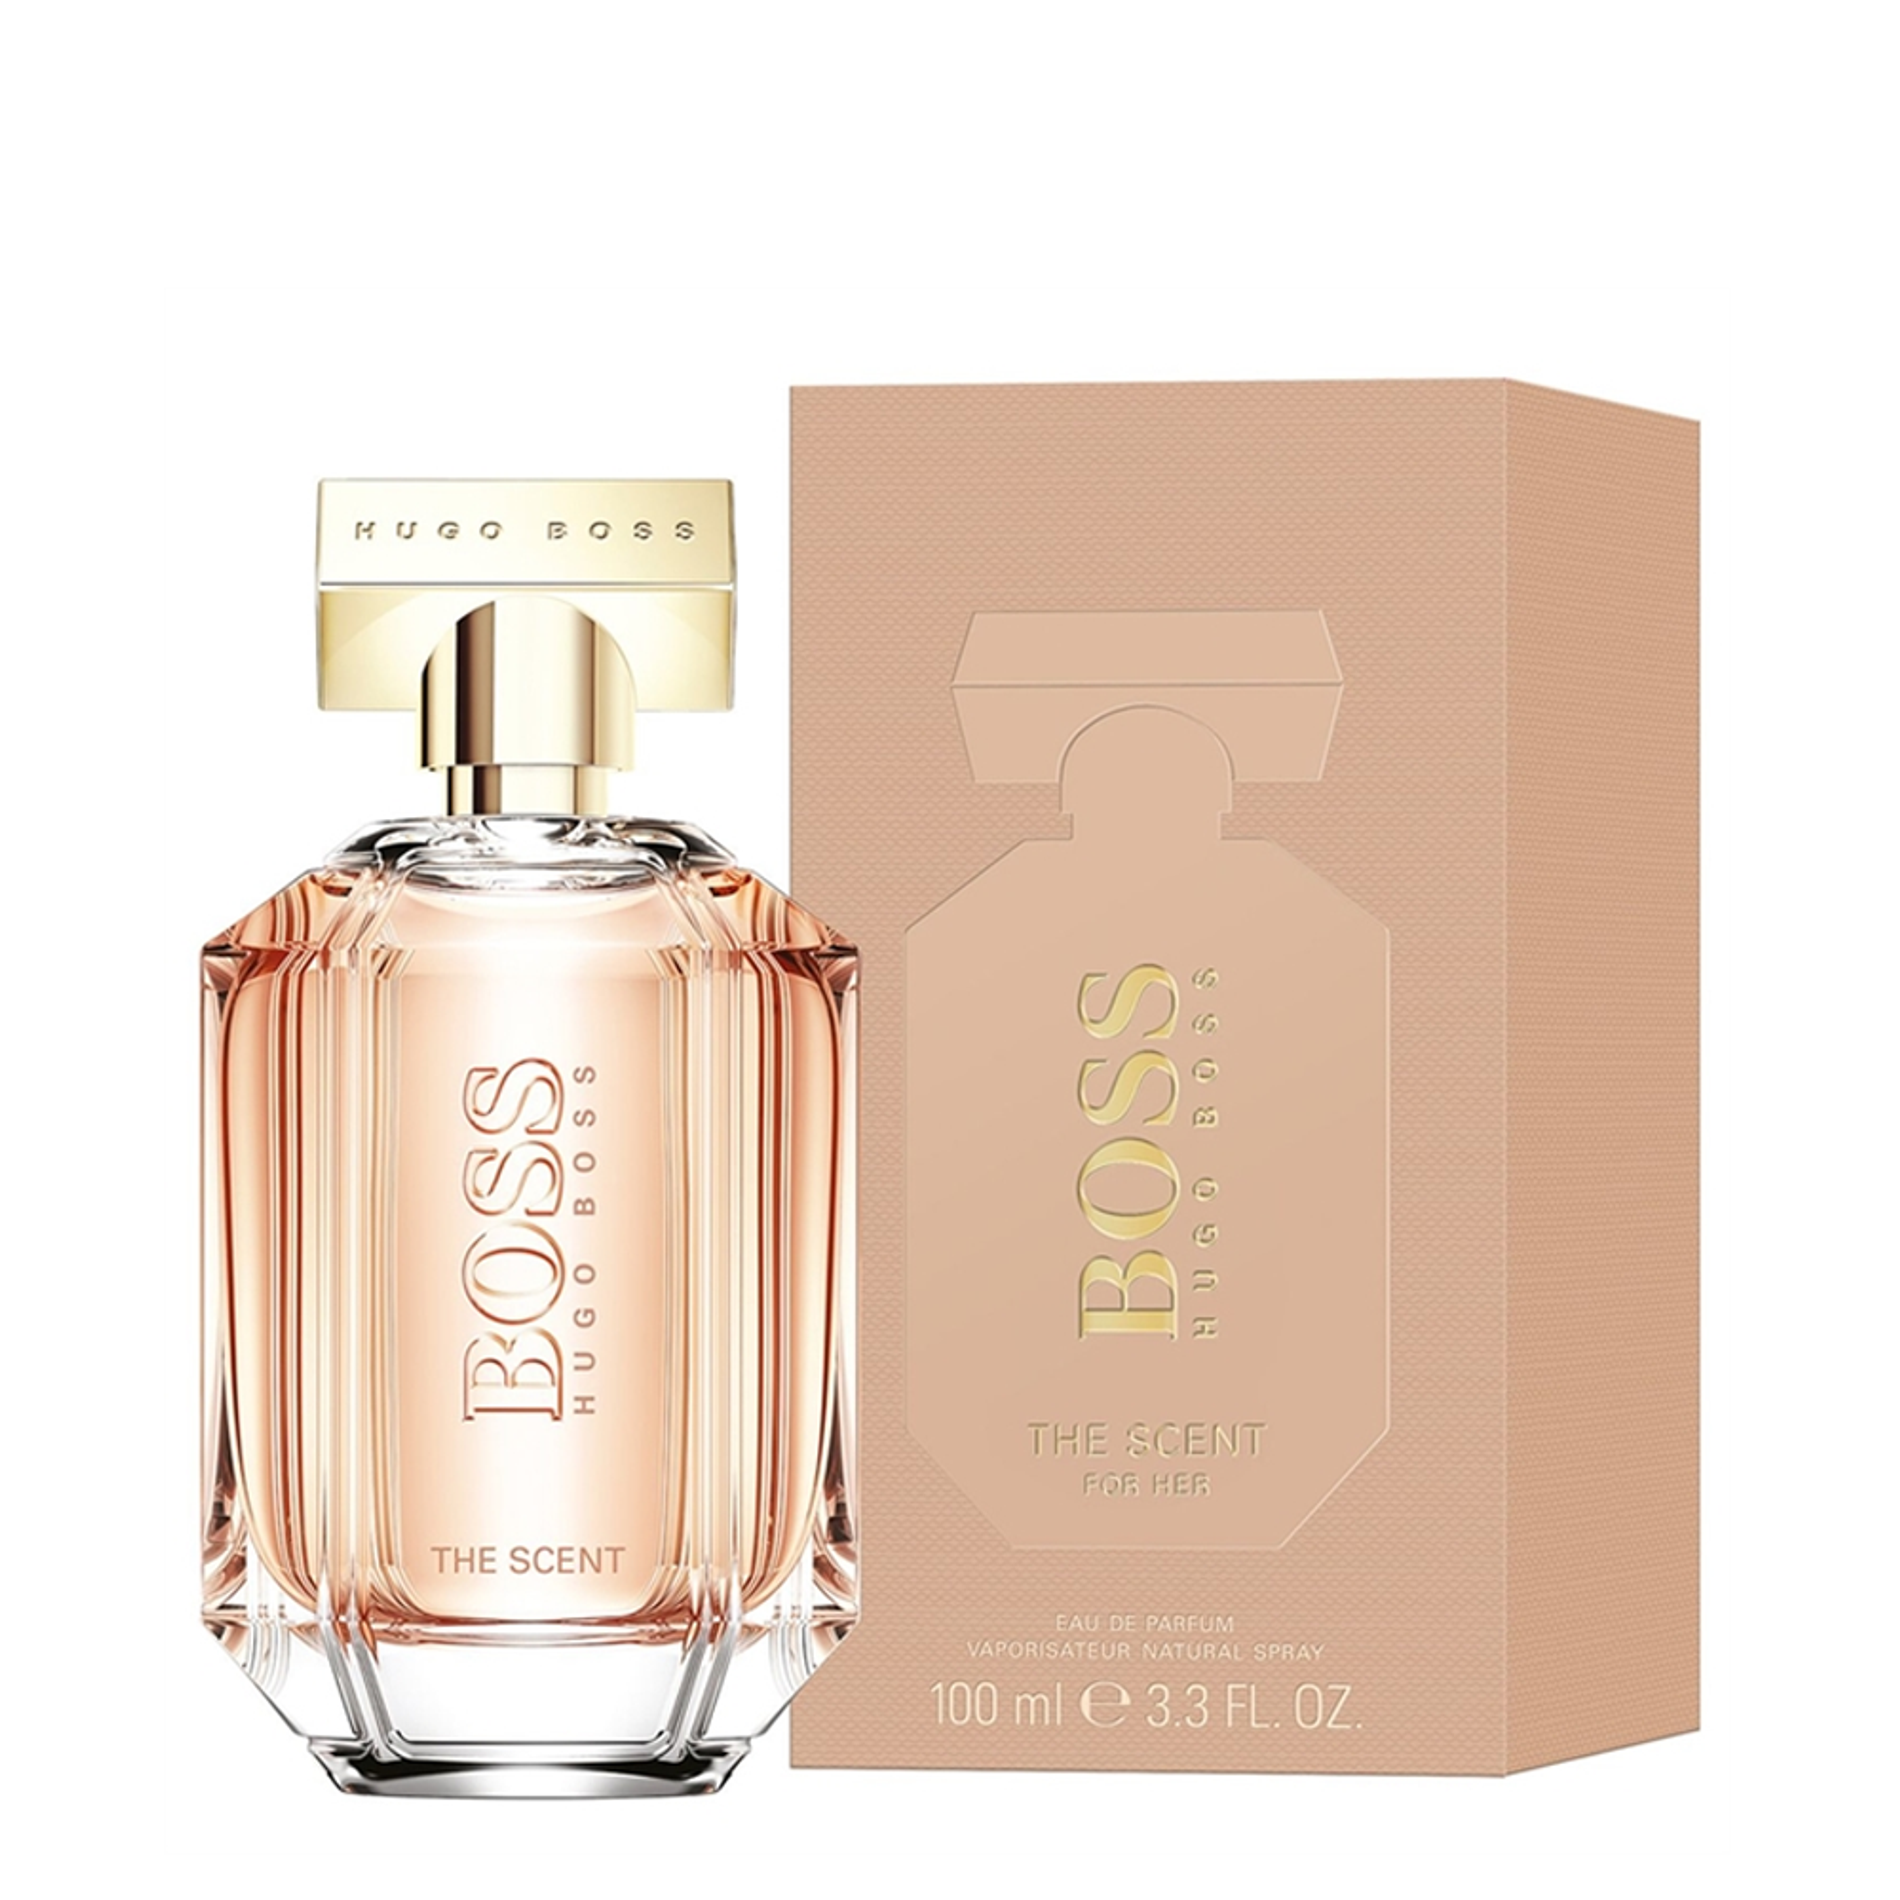 nuoc-hoa-danh-cho-nu-boss-hugo-boss-the-scent-for-her-edp-100ml-4